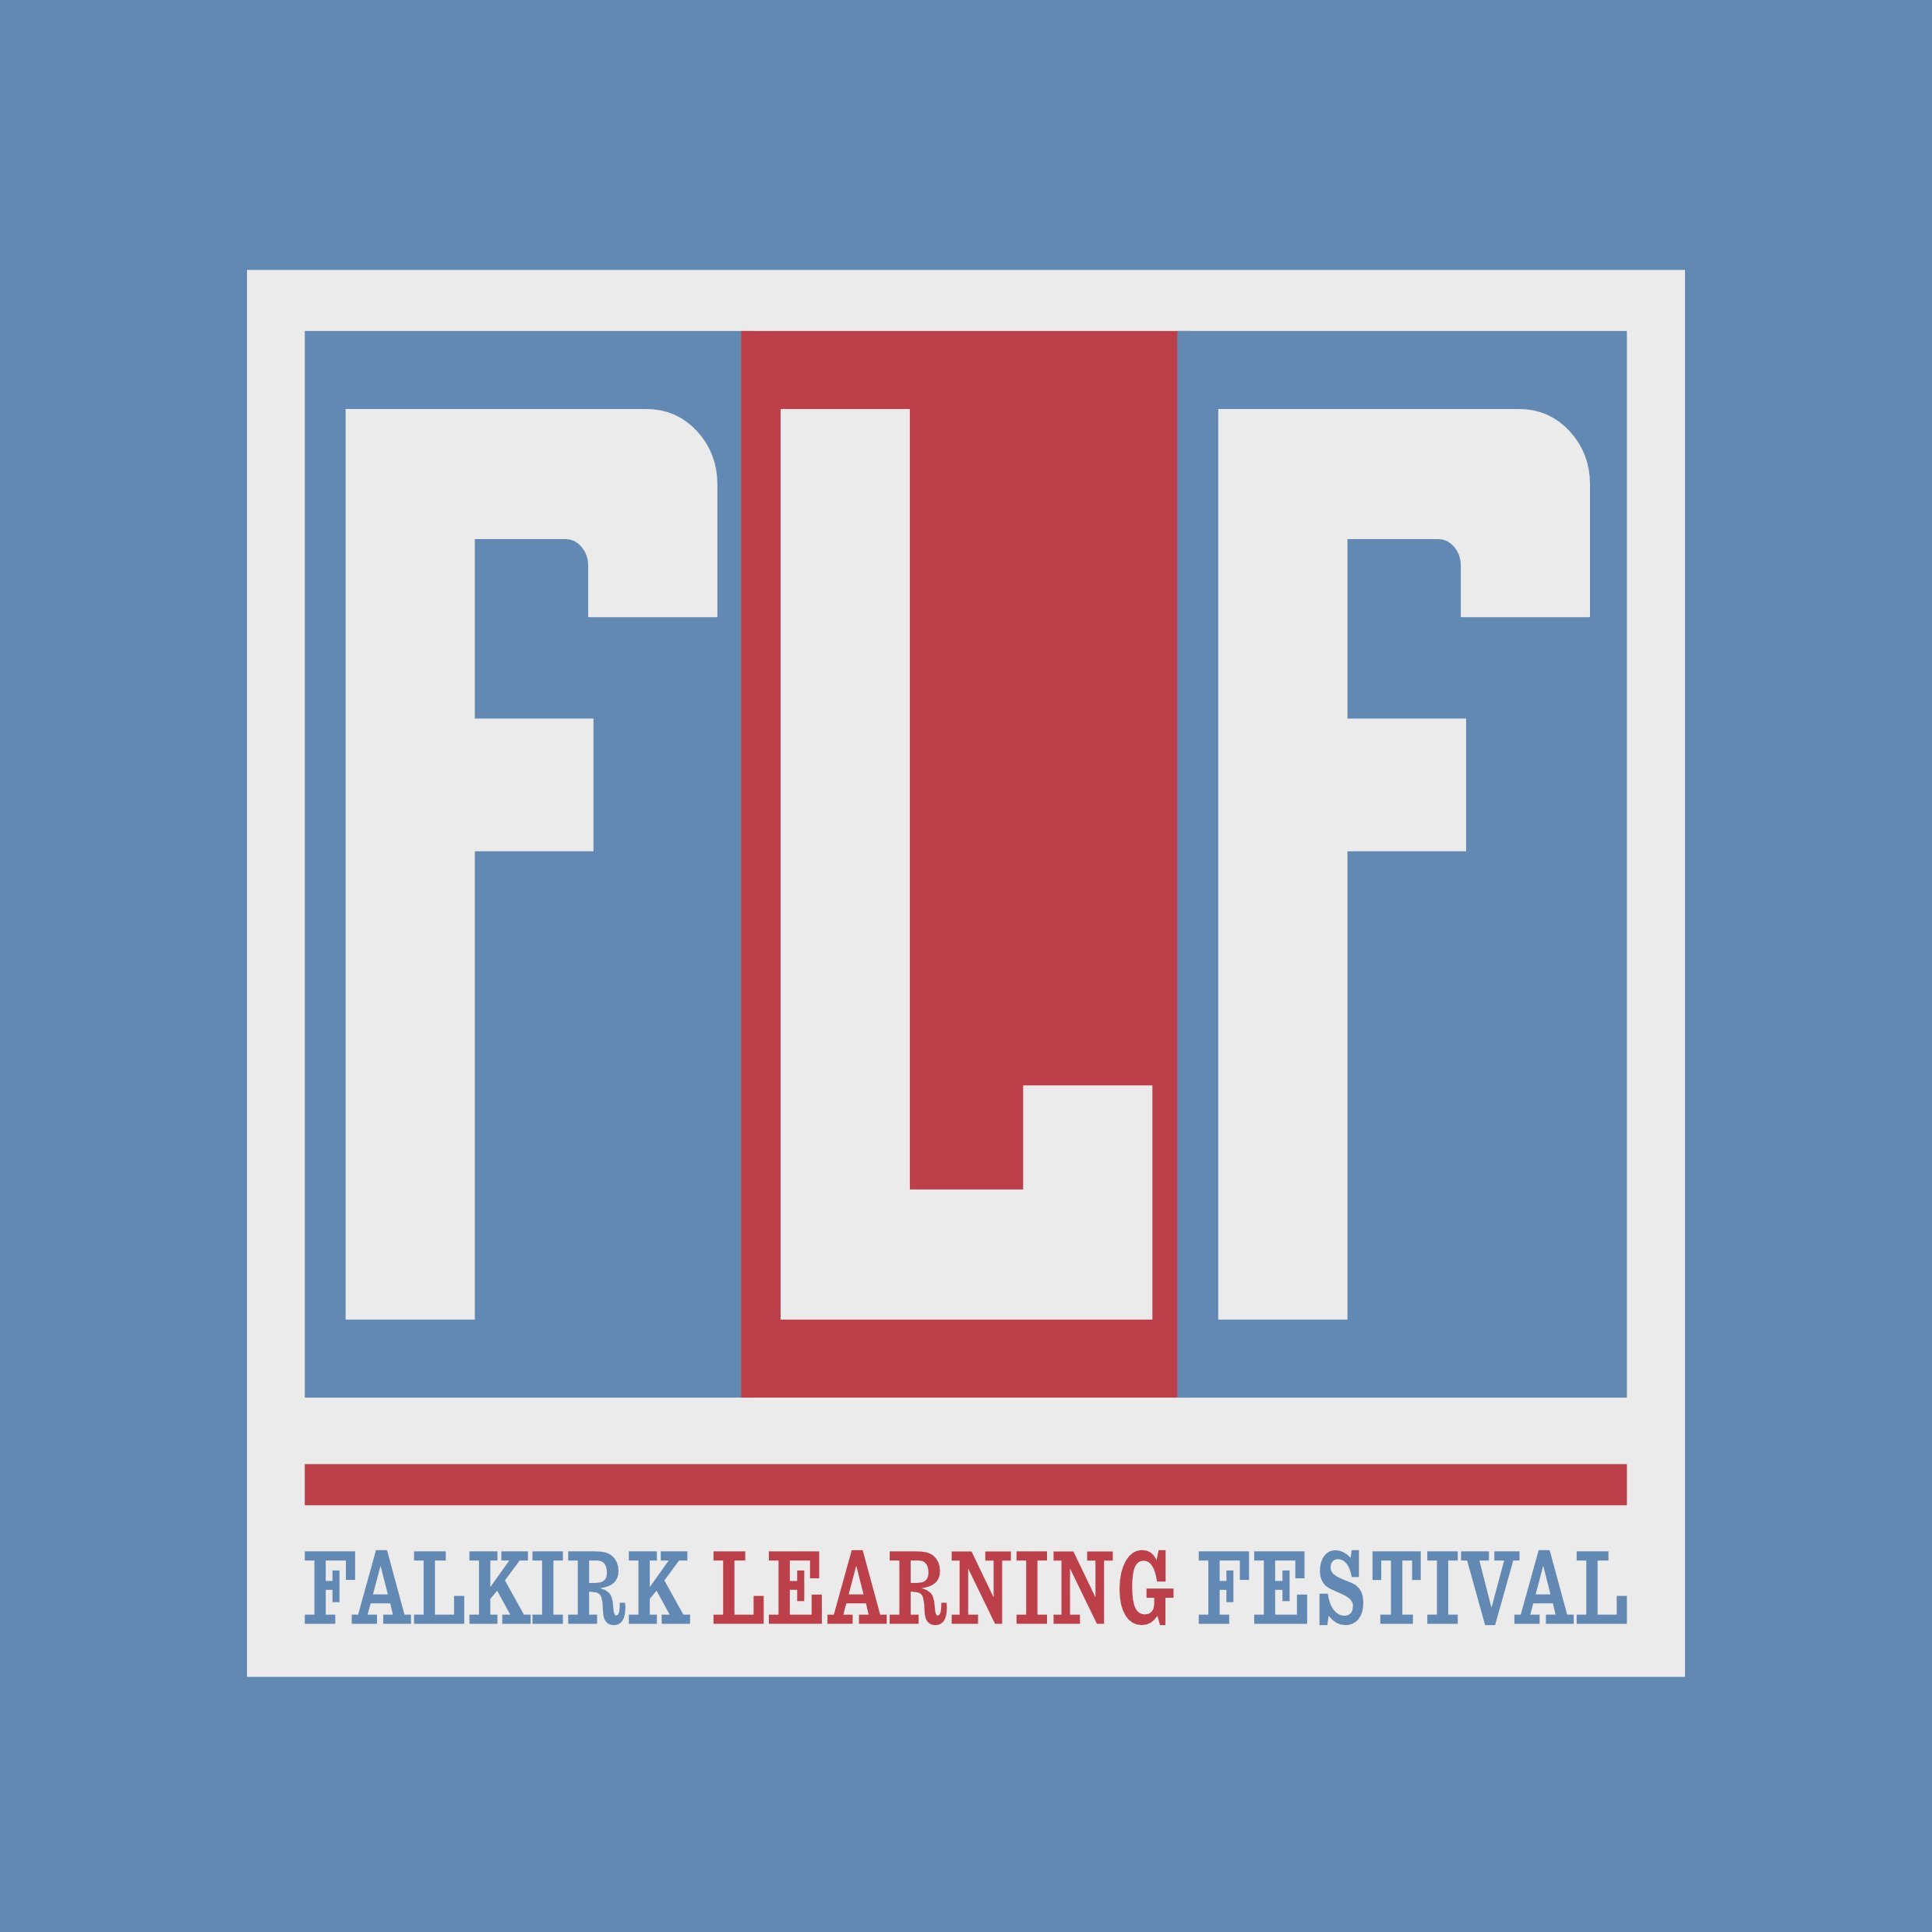 Official twitter account for the Falkirk Learning Festival, a learning event by educators, for educators!